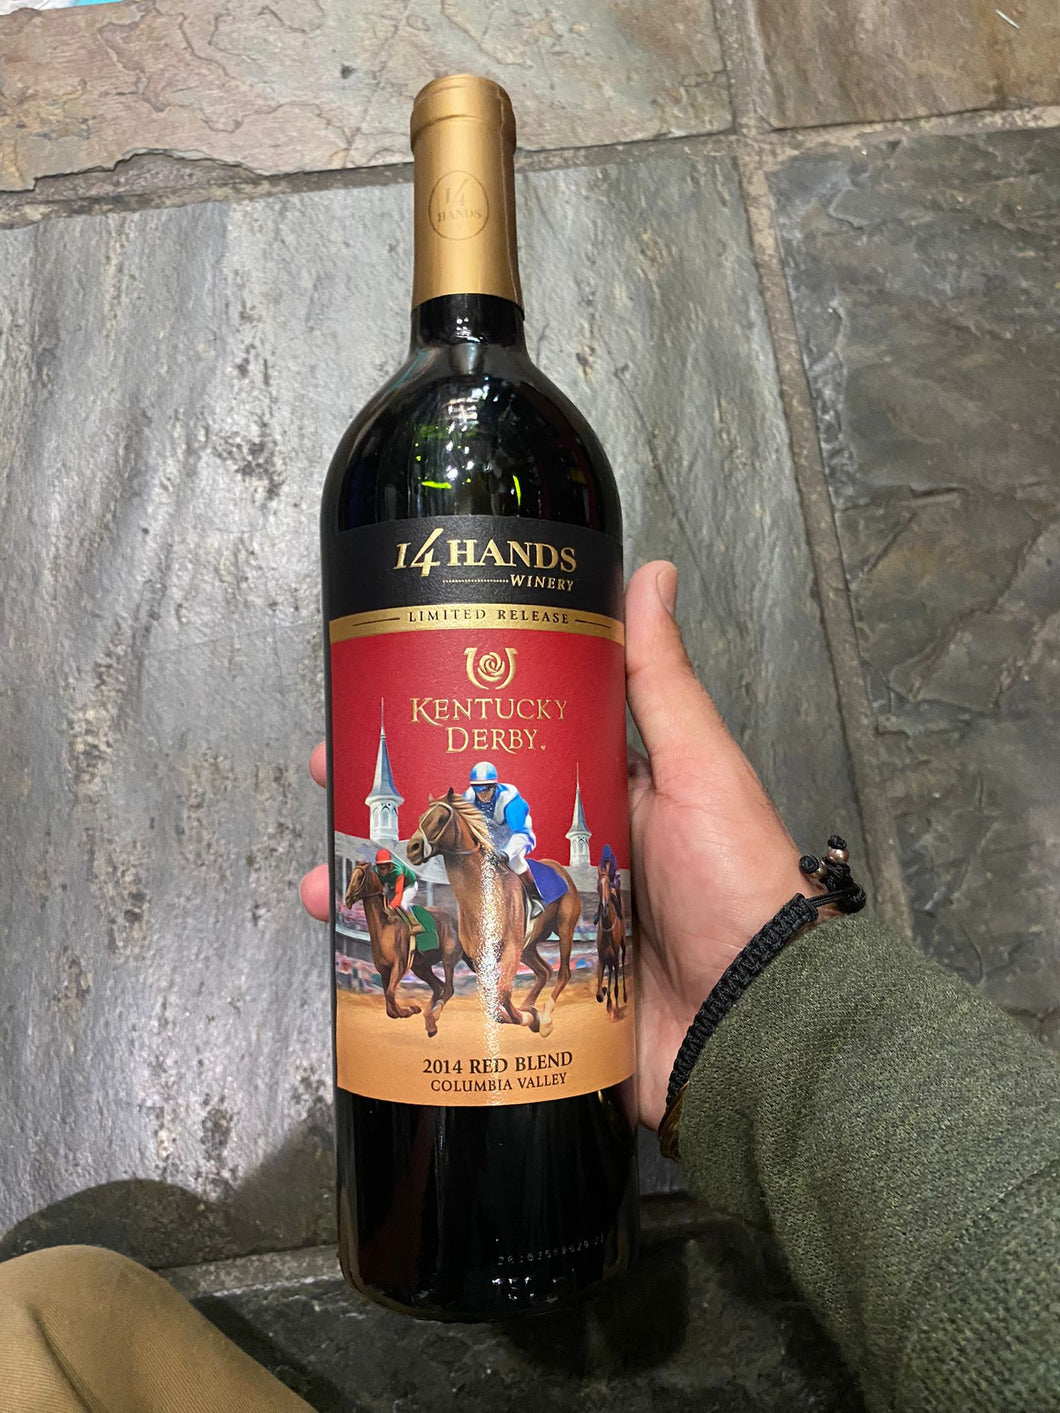 2016 14 Hands Winery Limited Release Kentucky Derby Columbia Valley Red Blend 750ml